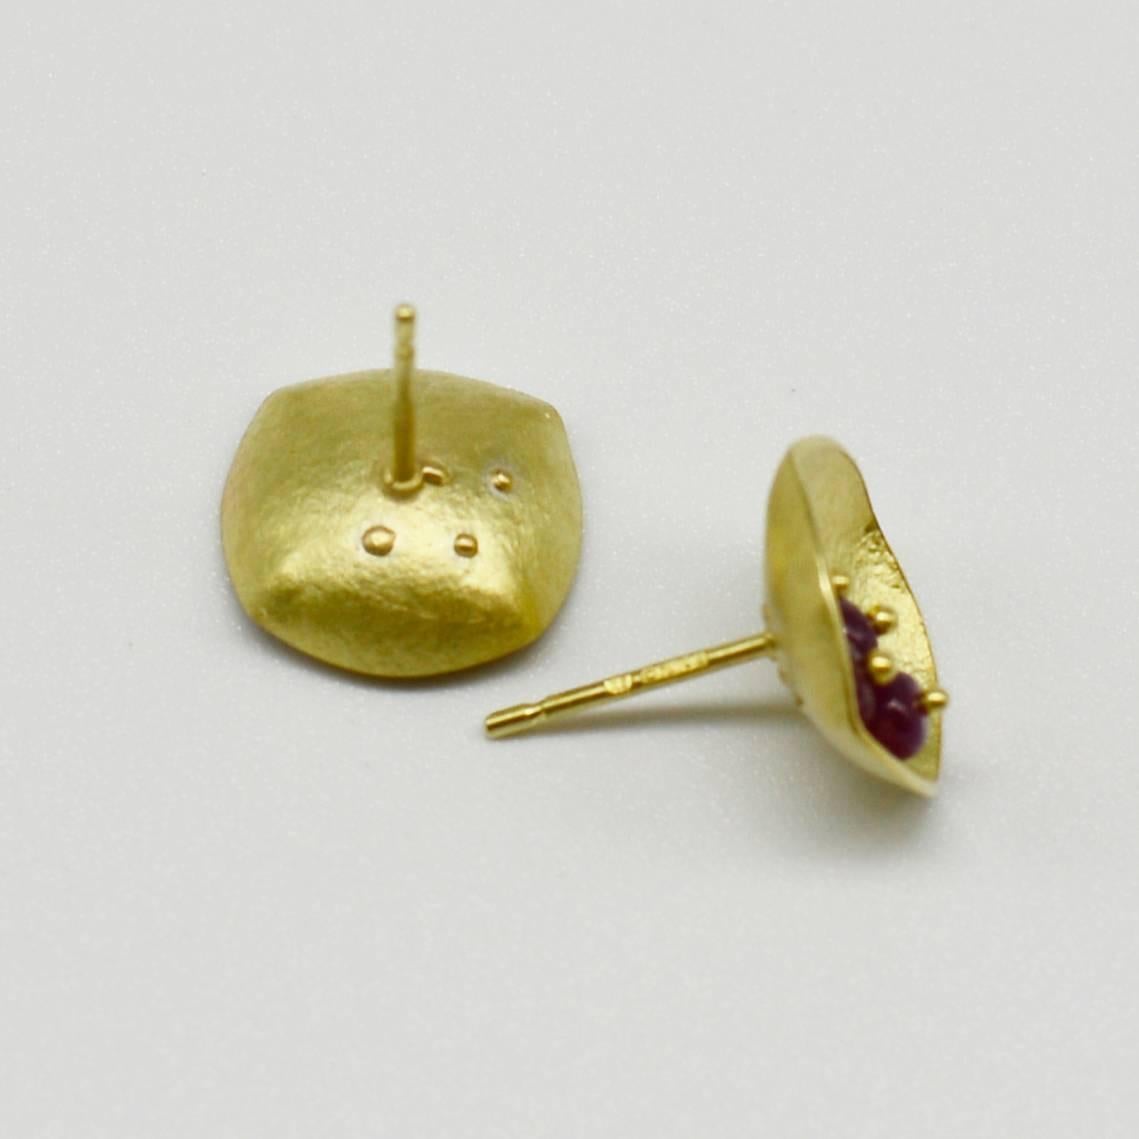 Berry-like ruby beads are placed in a simple square shape made of gold sheet. These beads are attached with a fusing technique, using a spot welding machine whose pinpoint accuracy protects the stones from heat damage.   

Lead time up to 4 weeks 